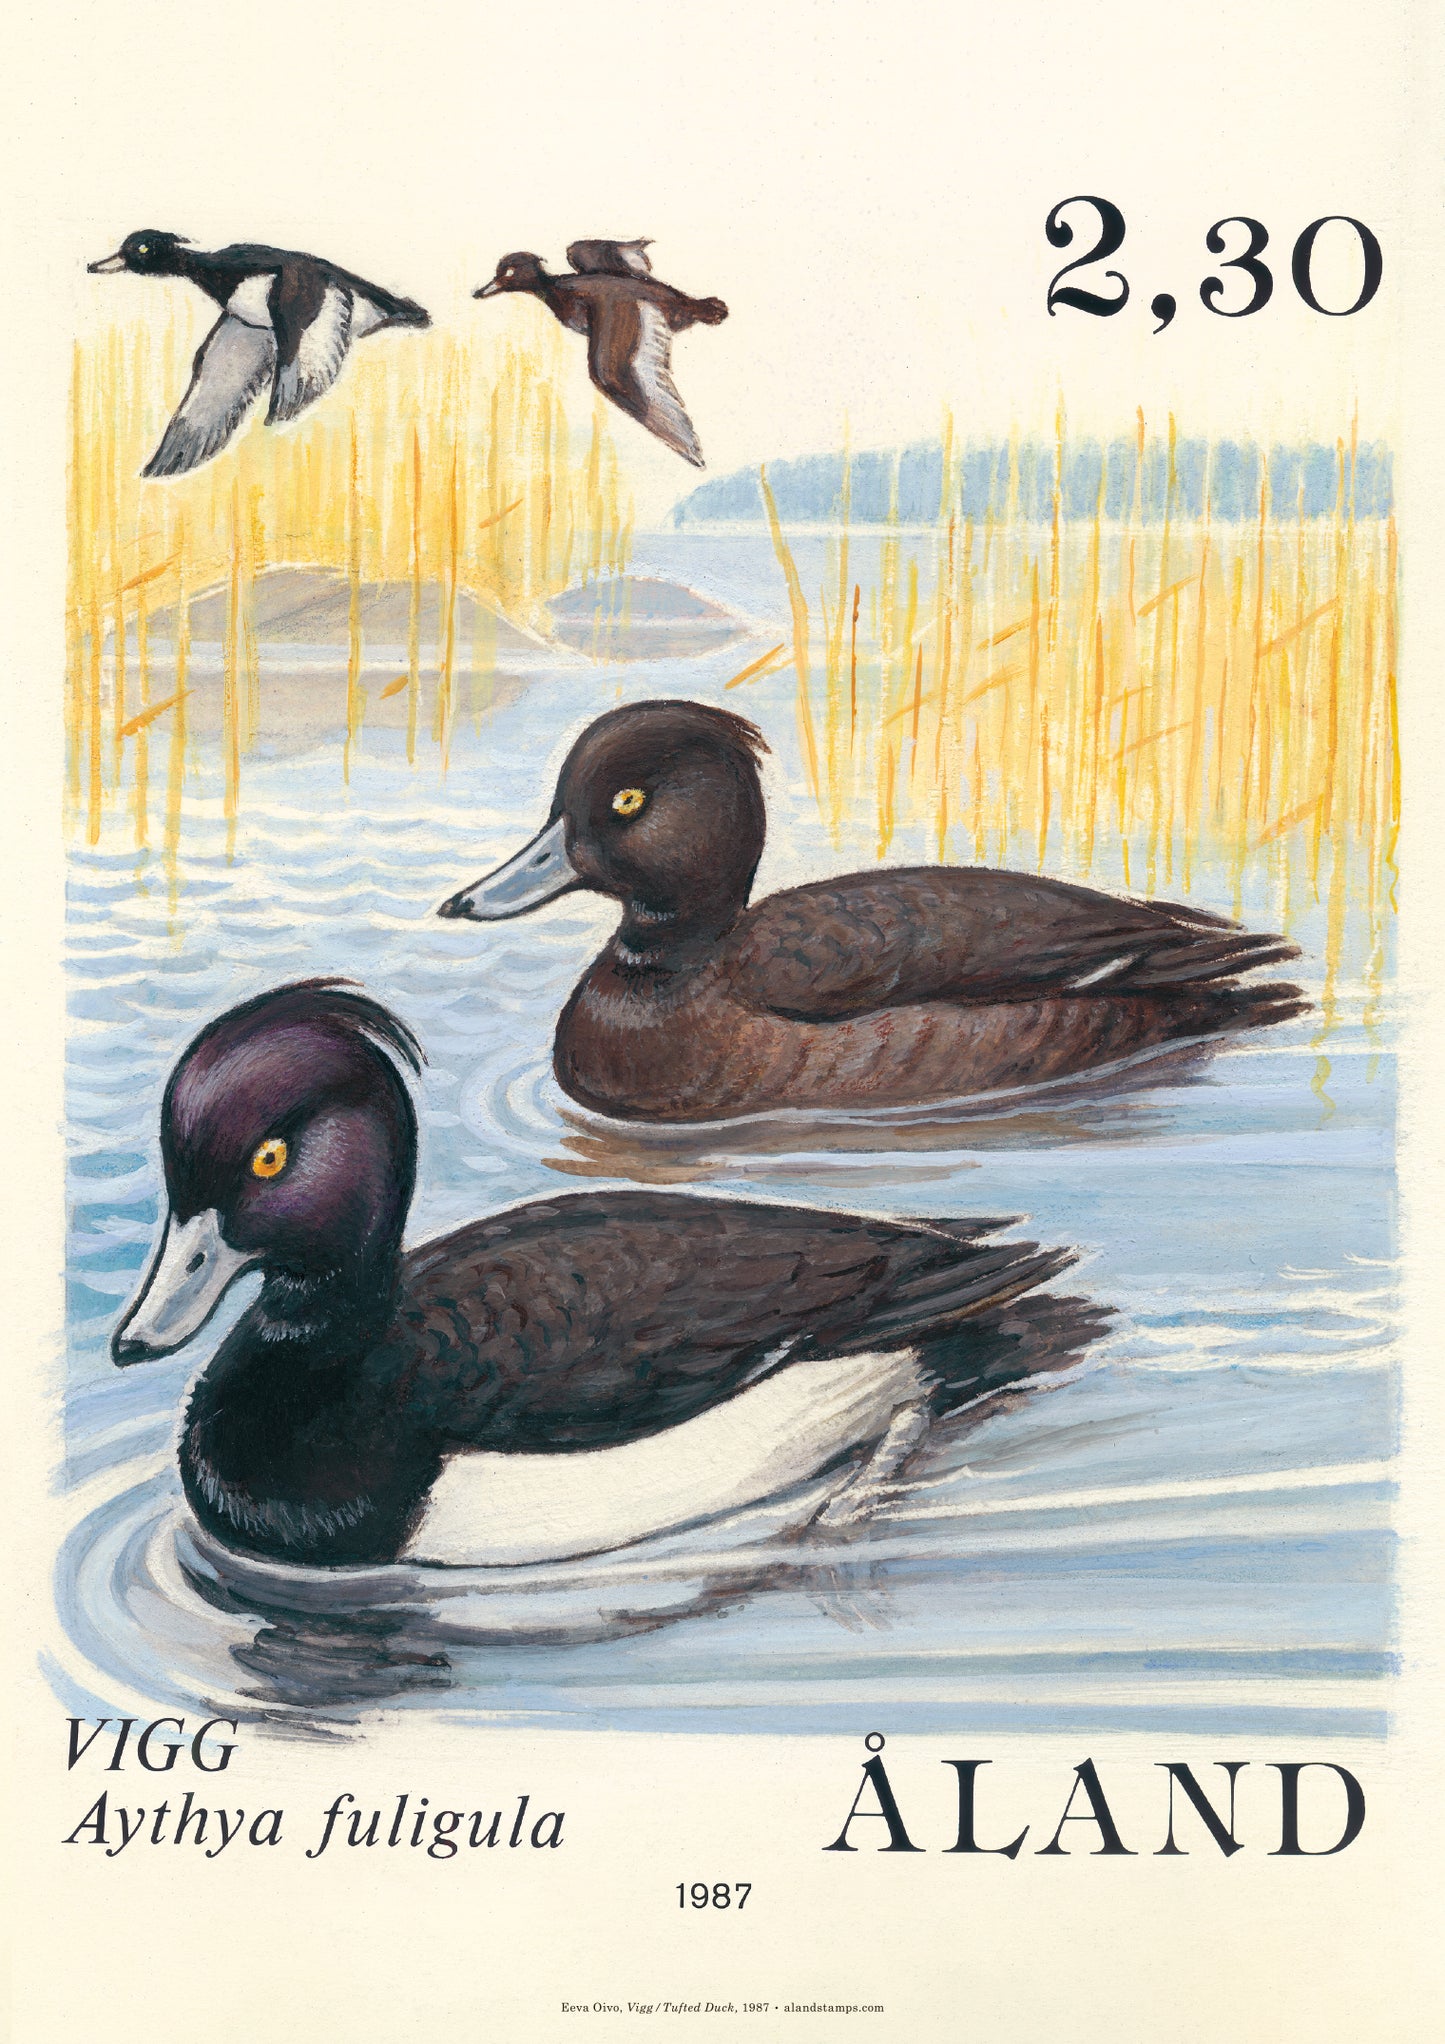 Heritage collection - Tufted duck, A4